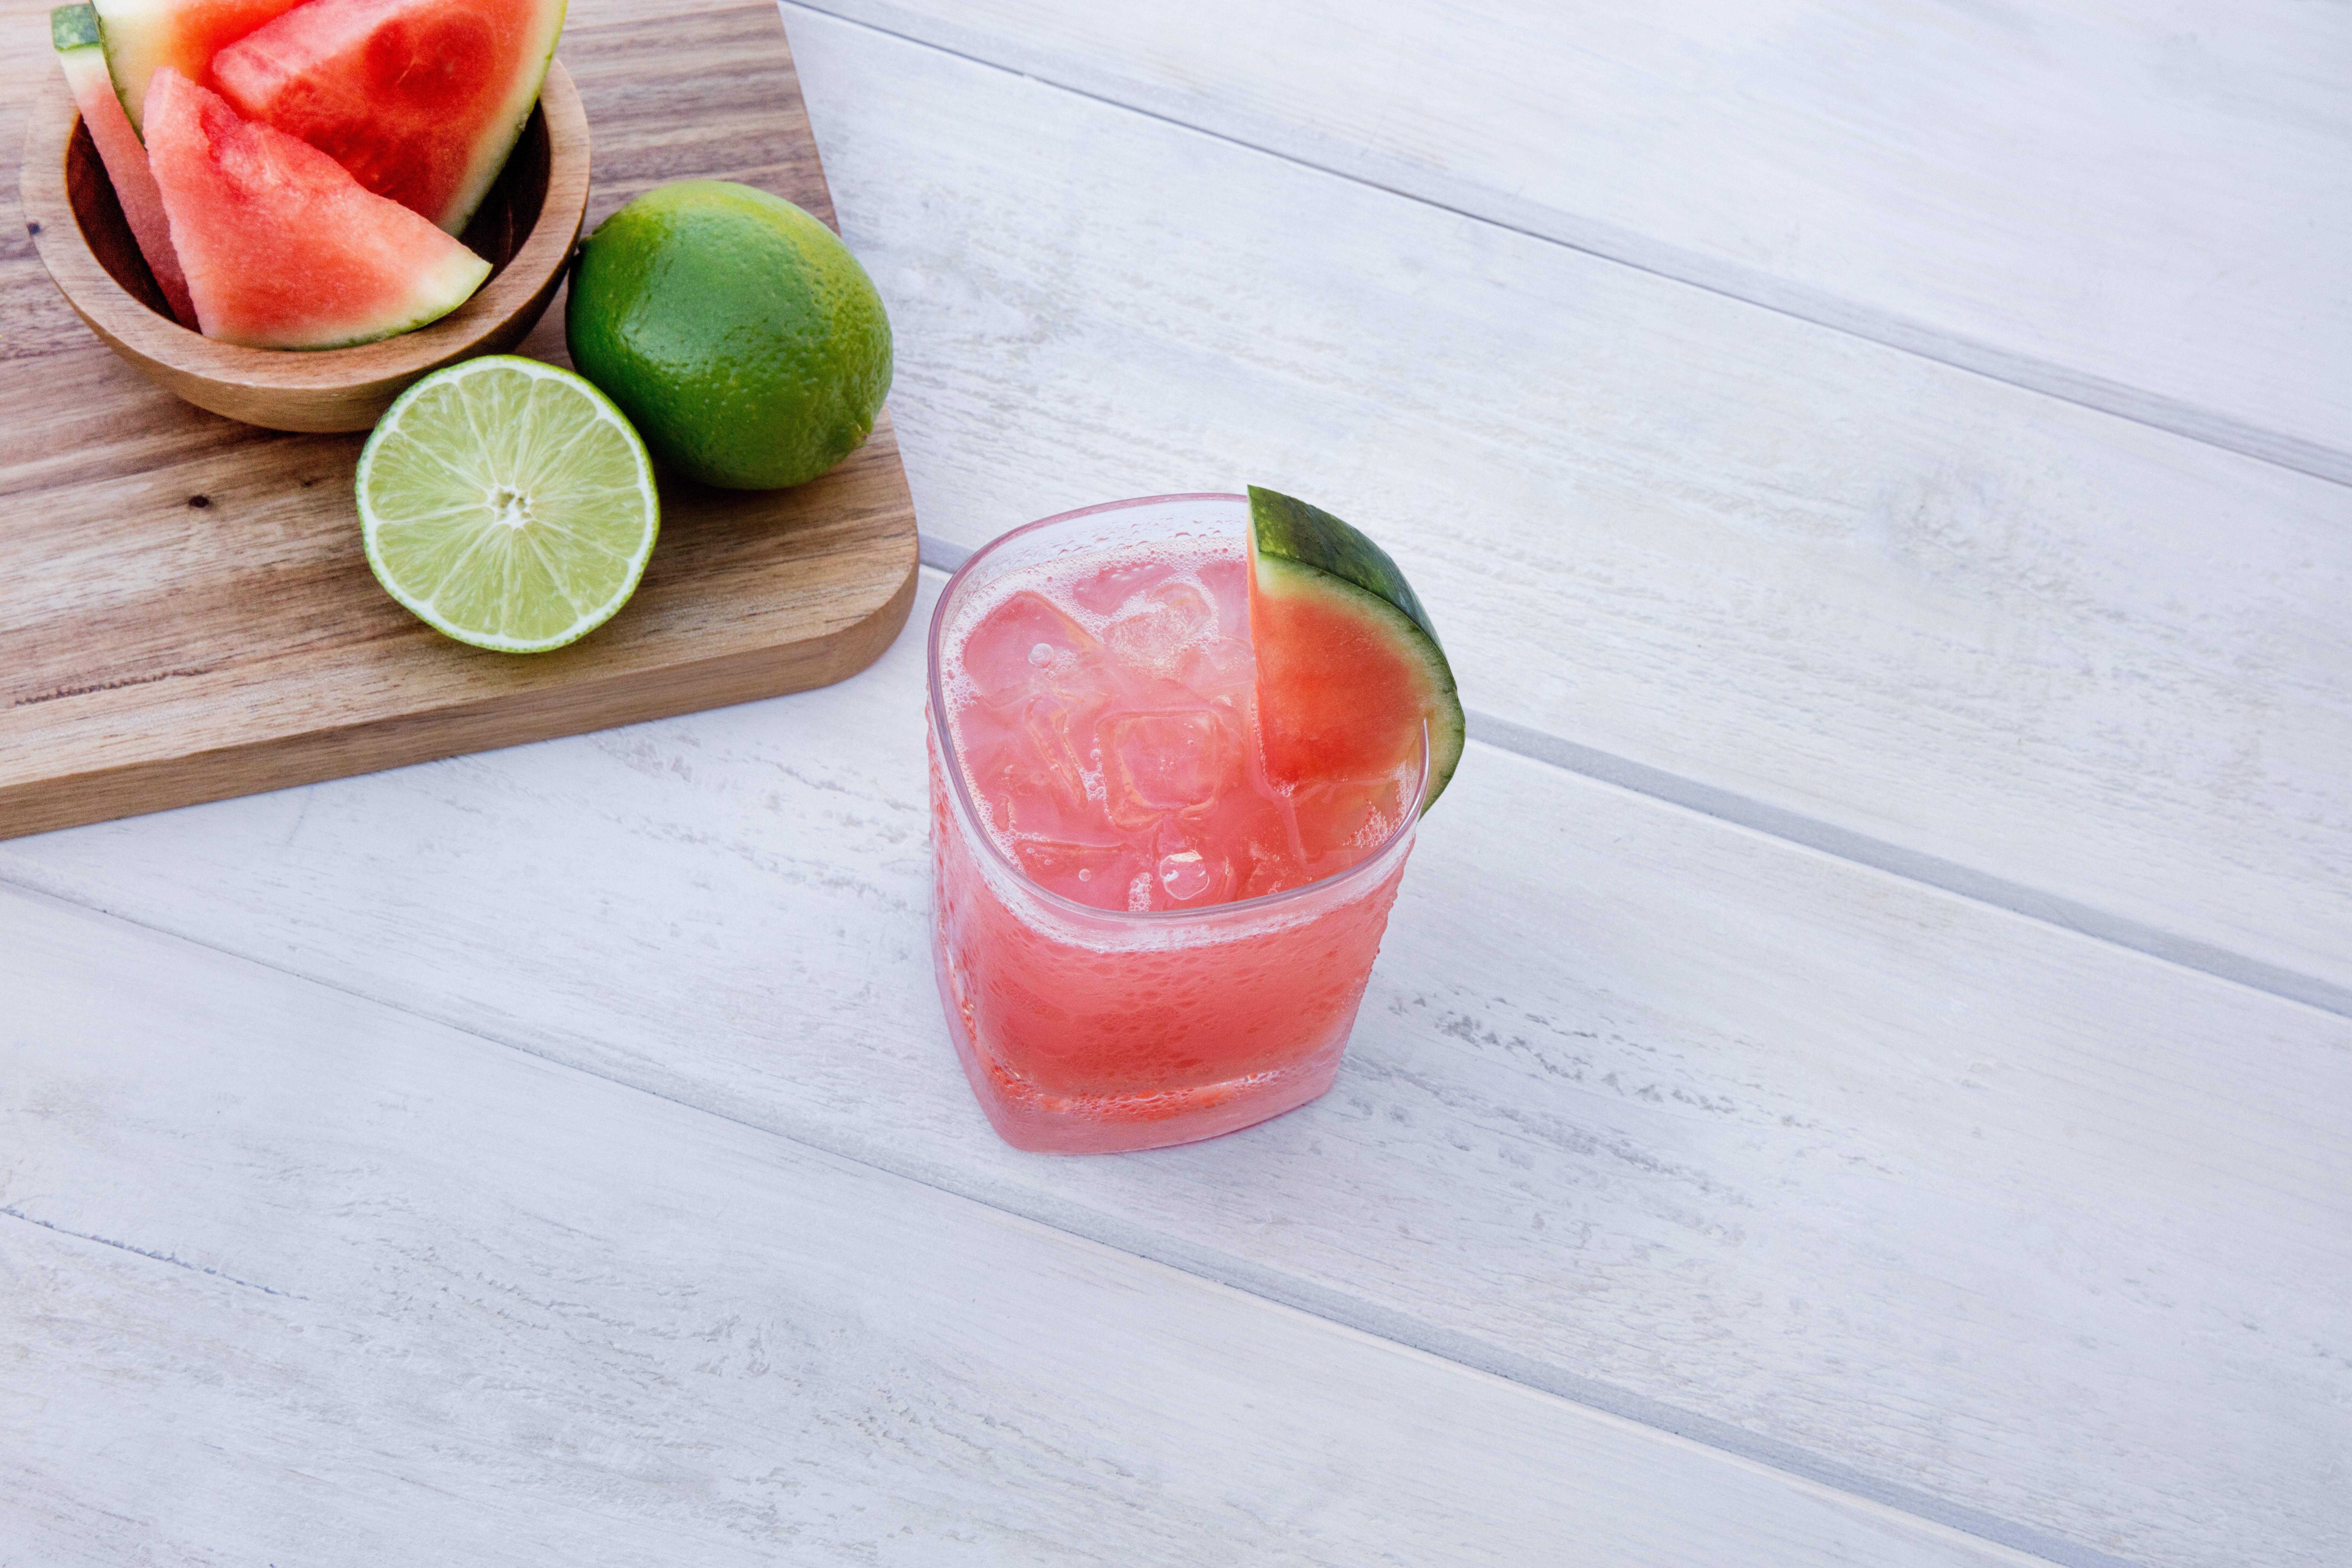 These Spicy Tequila Recipes Are Exactly What You Need For Your Next Date Night